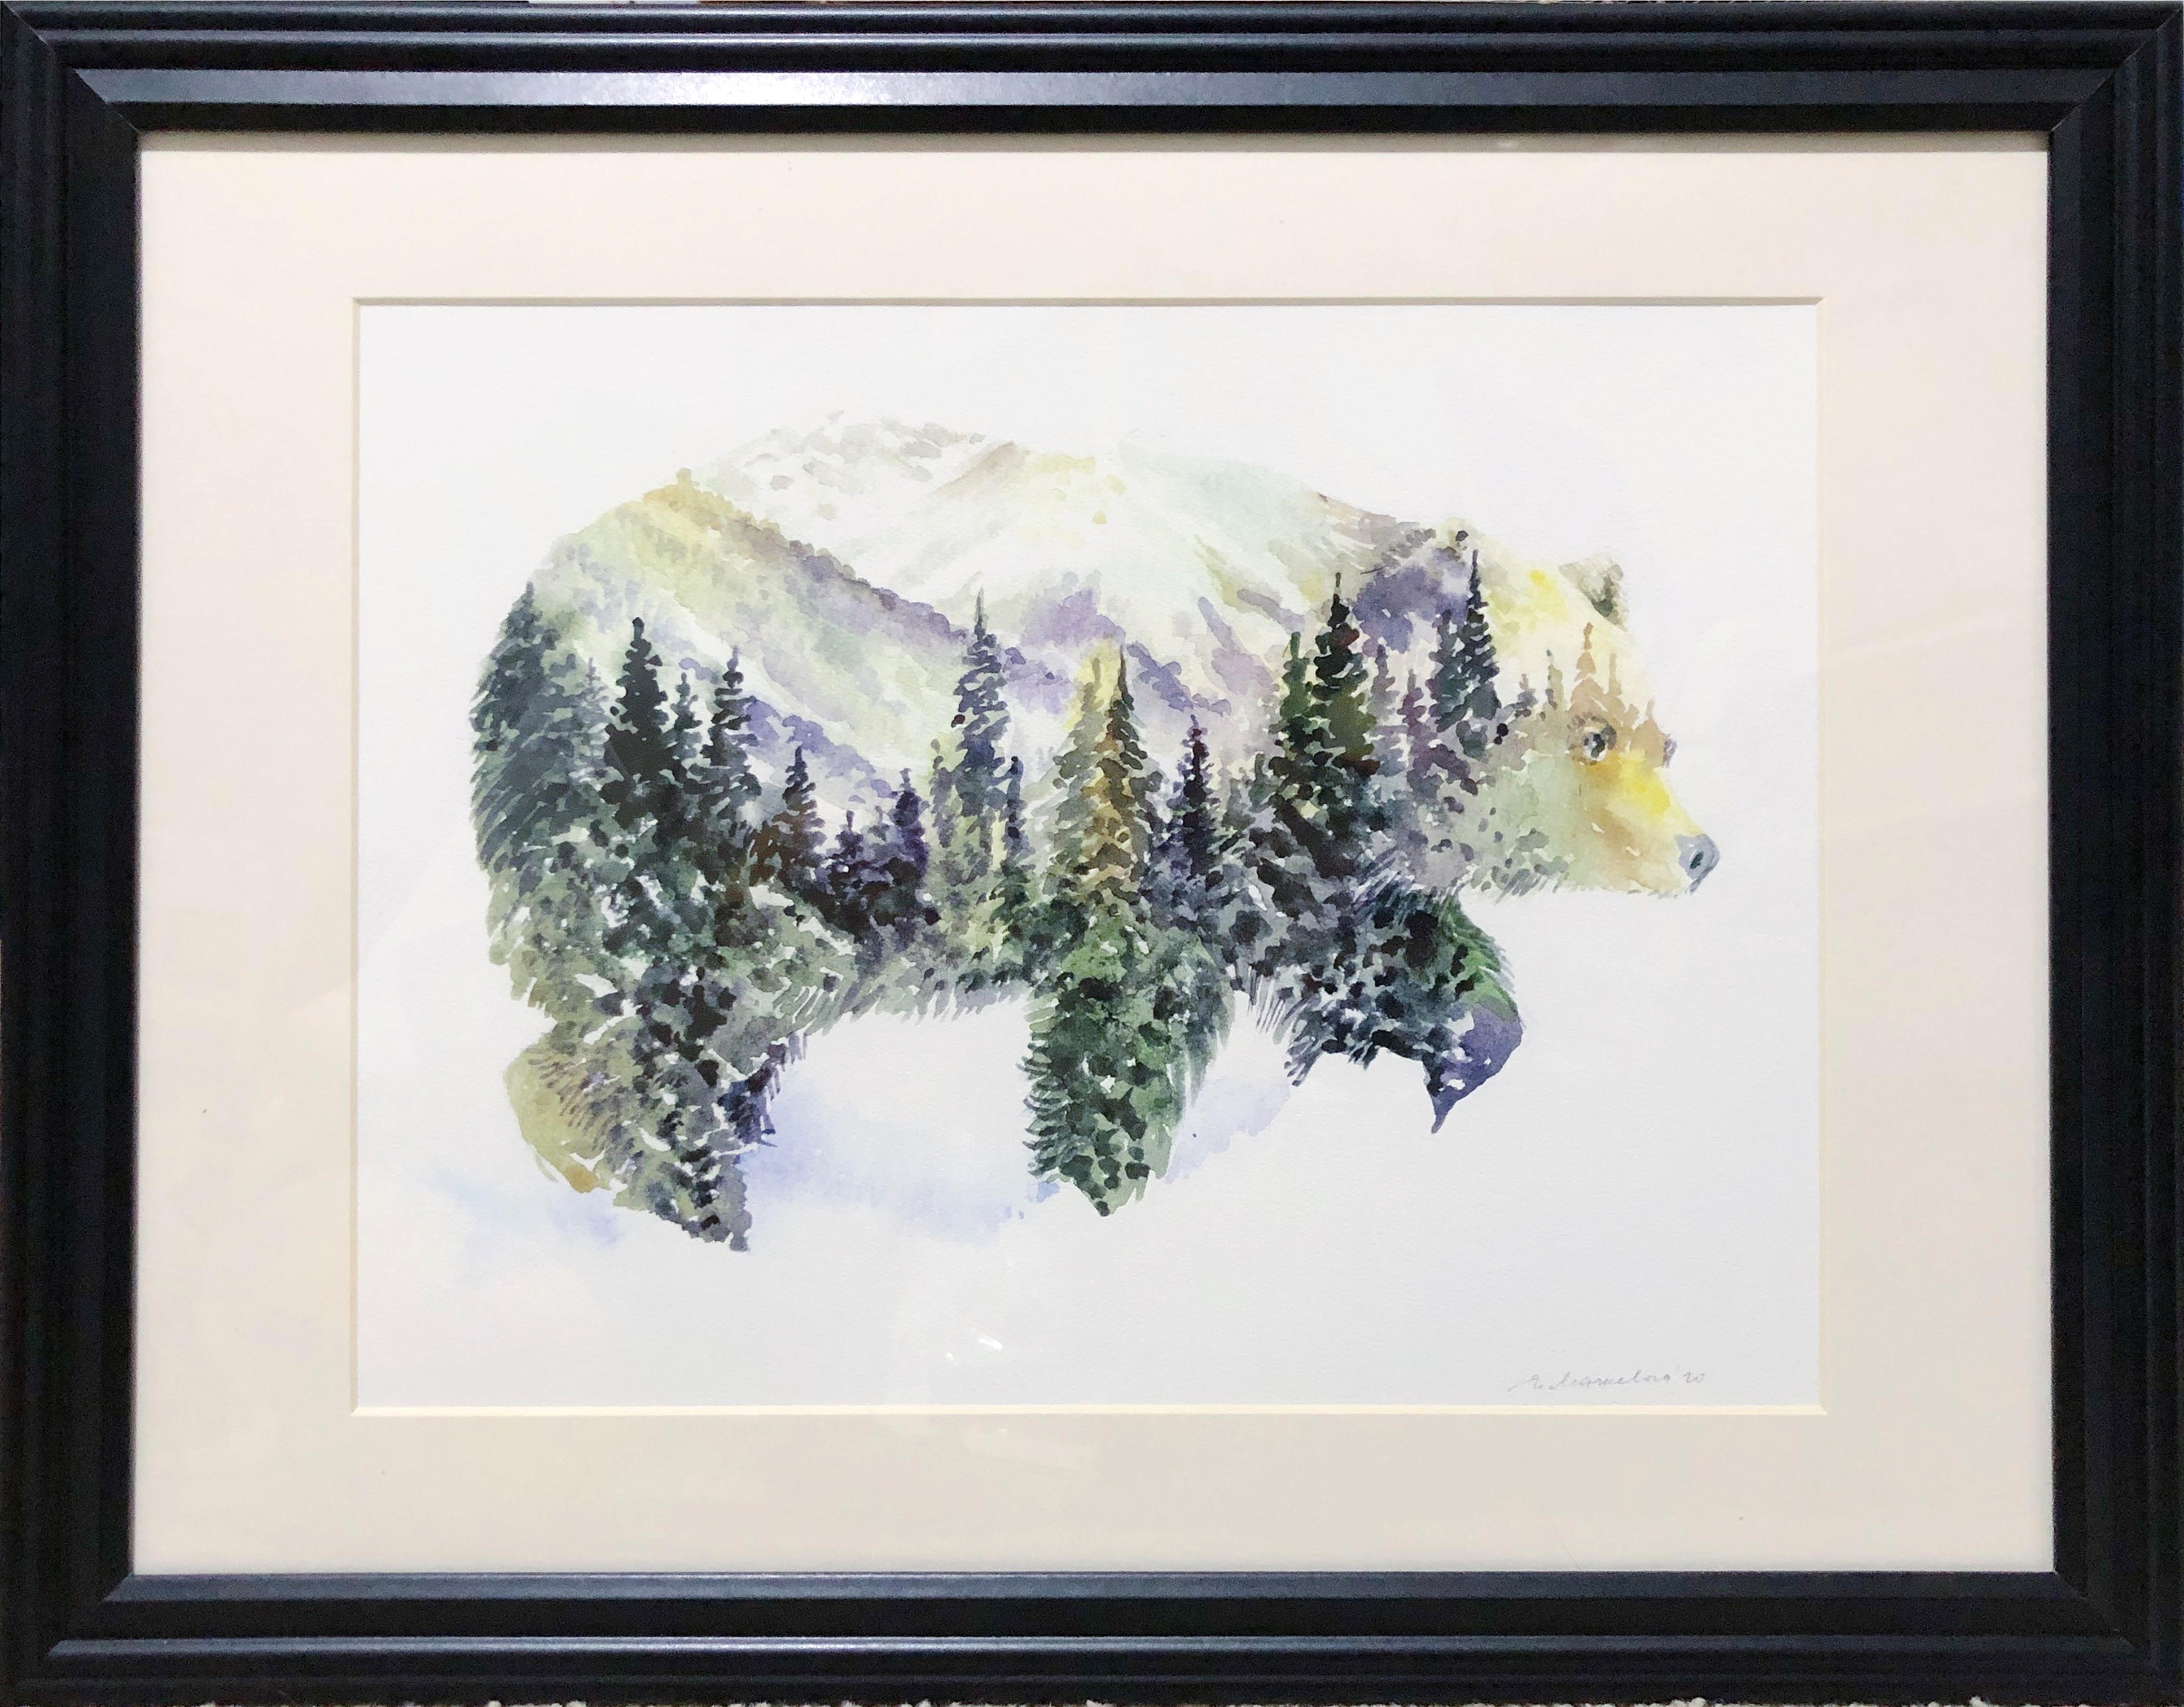 "The Eagle" Watercolor Art Print - Double Exposure Forest Painting